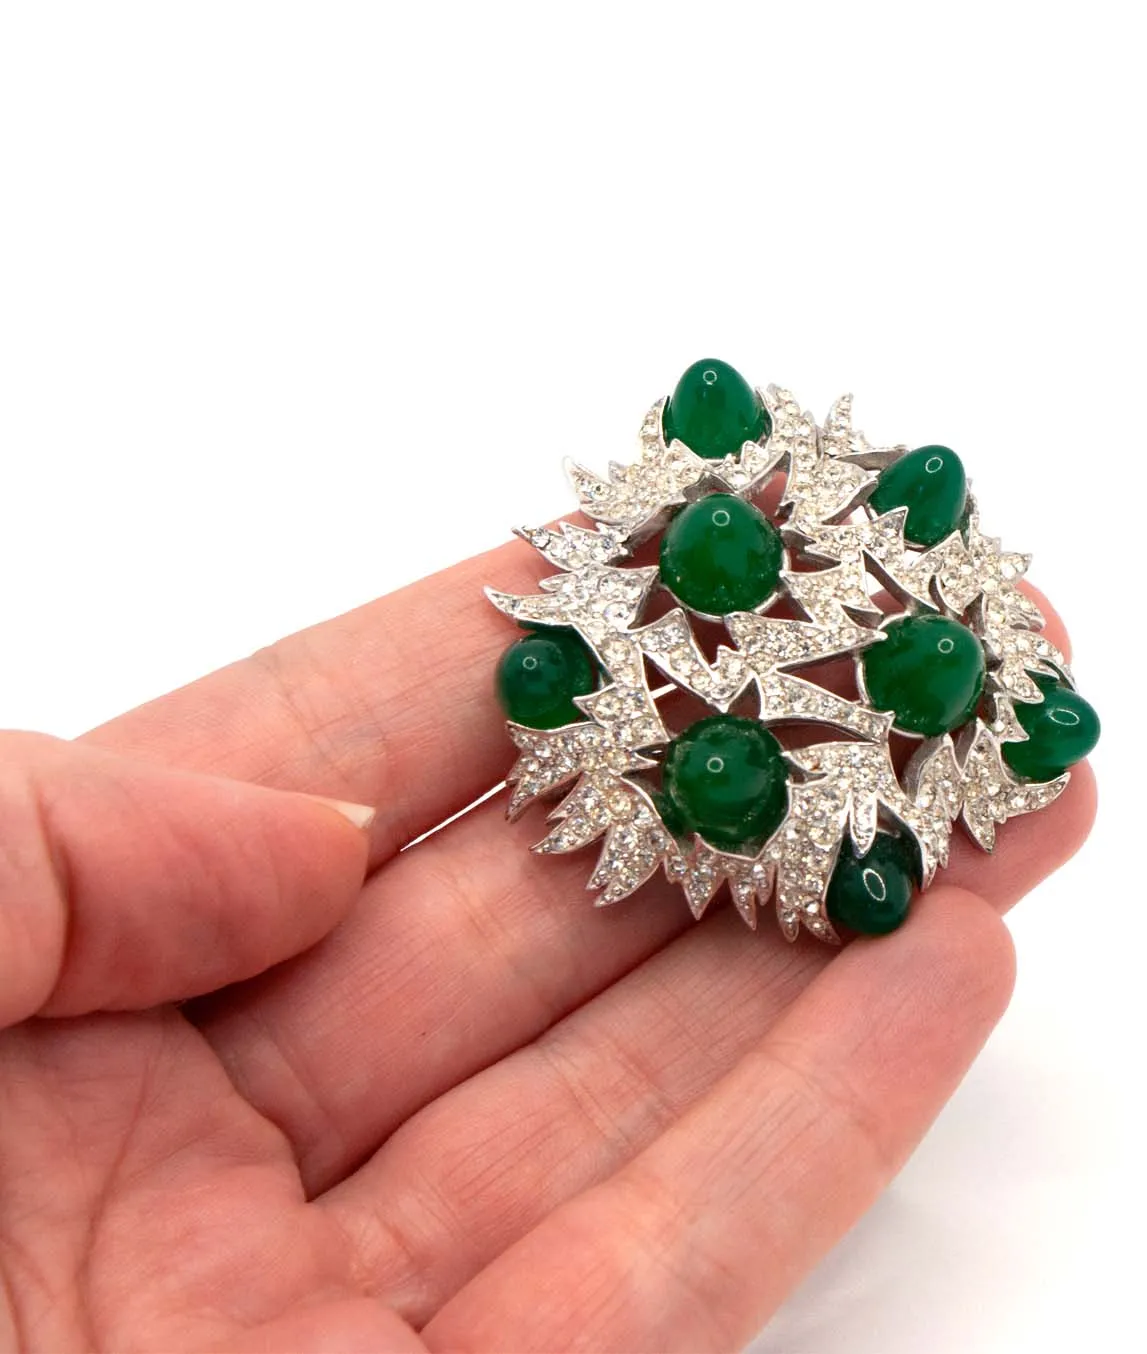 Vintage Marcel Boucher brooch with pavé crystals and green glass cabochons held in the hand